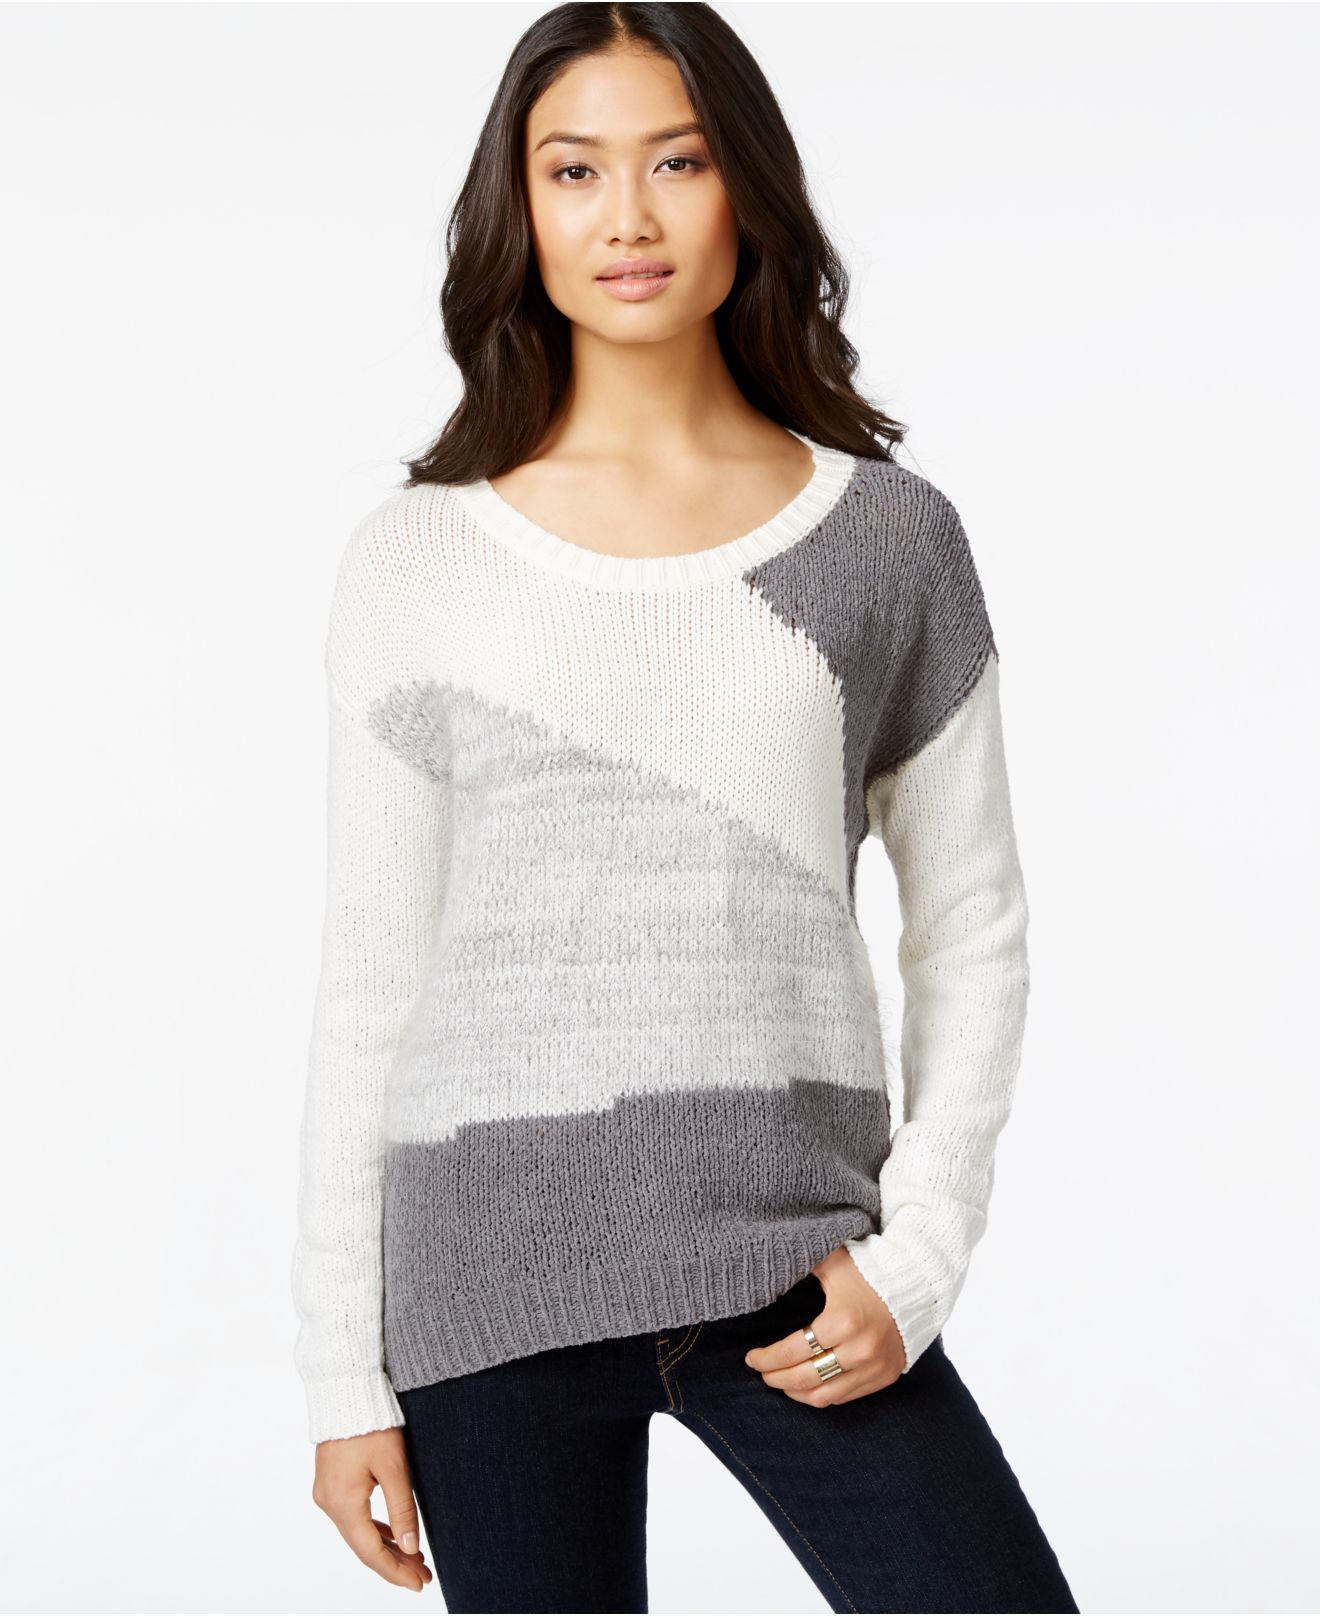 Lyst - Dkny Colorblocked Knit Sweater in Natural